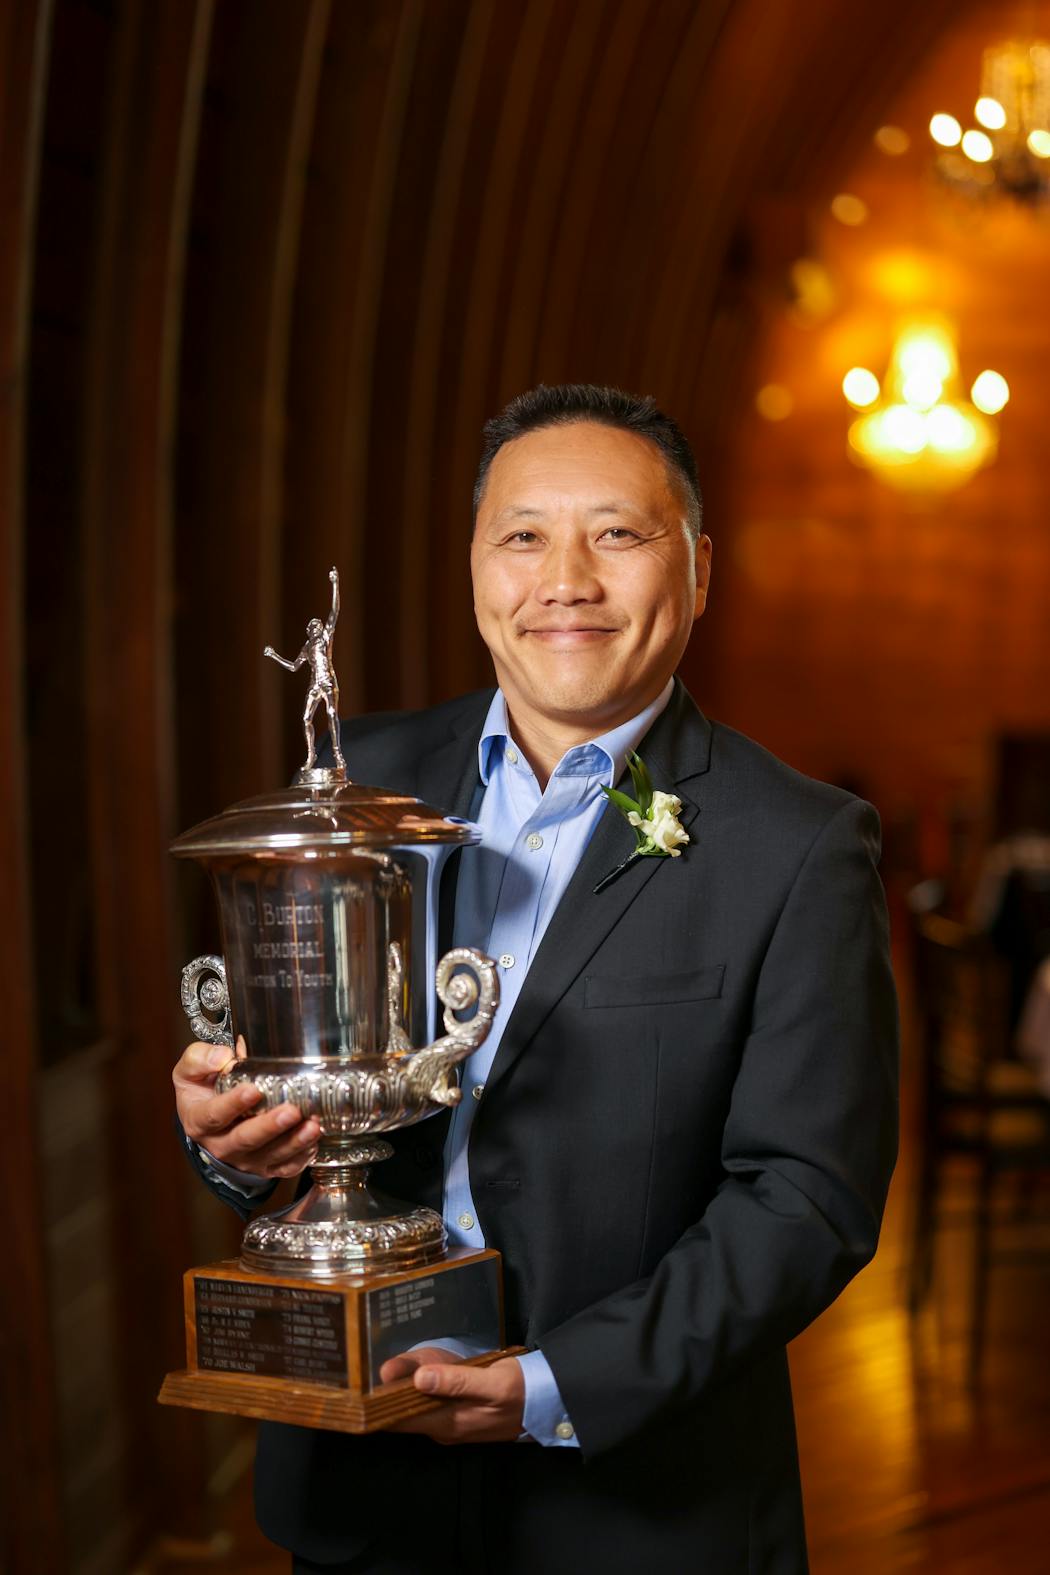 Koua Yang, athletic director for Como Park Senior High, was recognized this spring by the United States Tennis Association for creating more opportunities for youth to play tennis. “When you give kids opportunity, they blossom.”